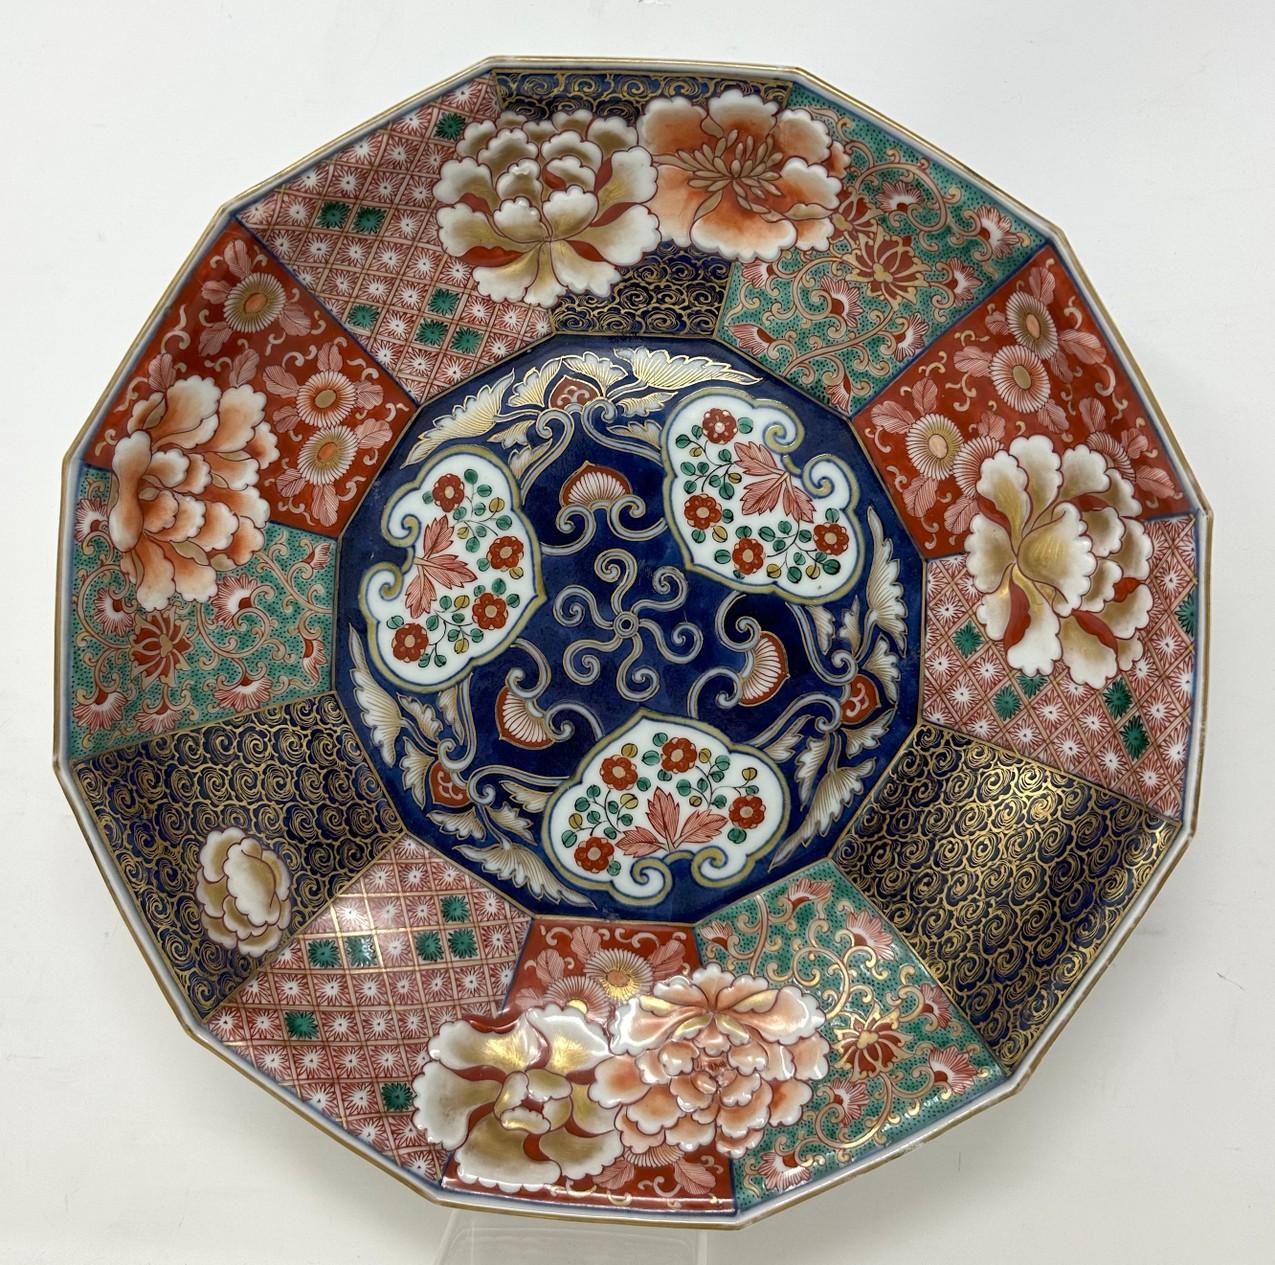 Stunning Large Japanese Circular Dodecagon Form Imari Deep Cabinet Bowl or Centerpiece of outstanding quality and generous proportions, made during the last half of the Nineteenth Century possibly from the Koransha Potteries. 

Extensively hand